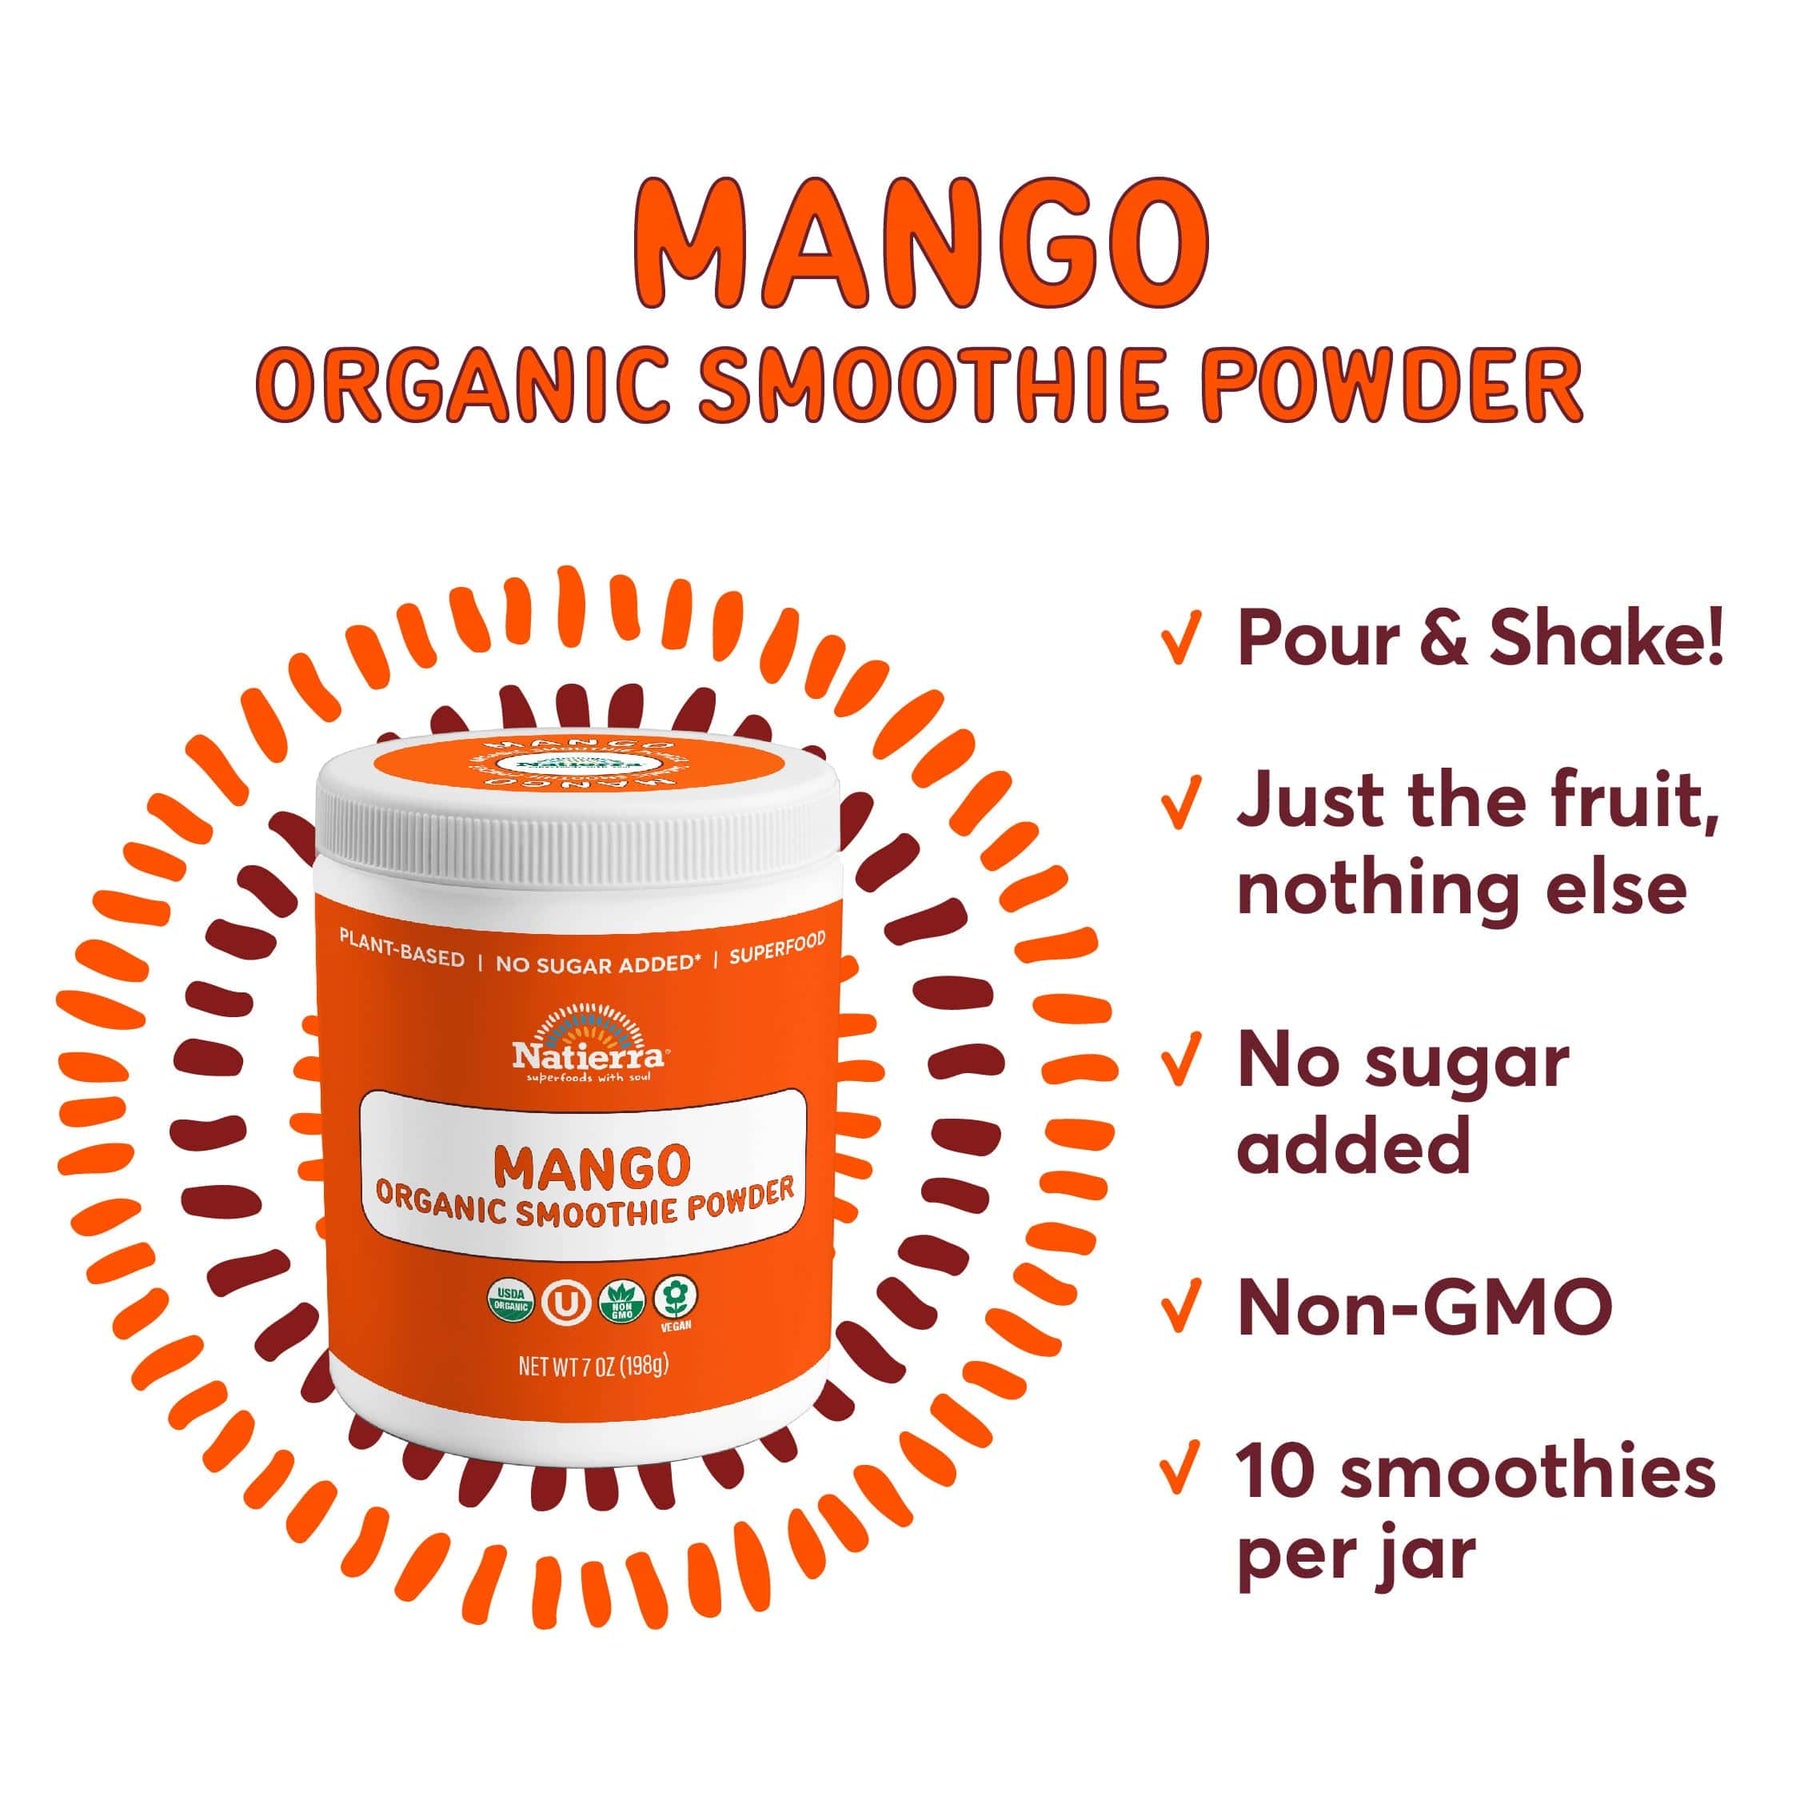 A jar of Natierra Mango Organic Smoothie Powder next to list of main product claims